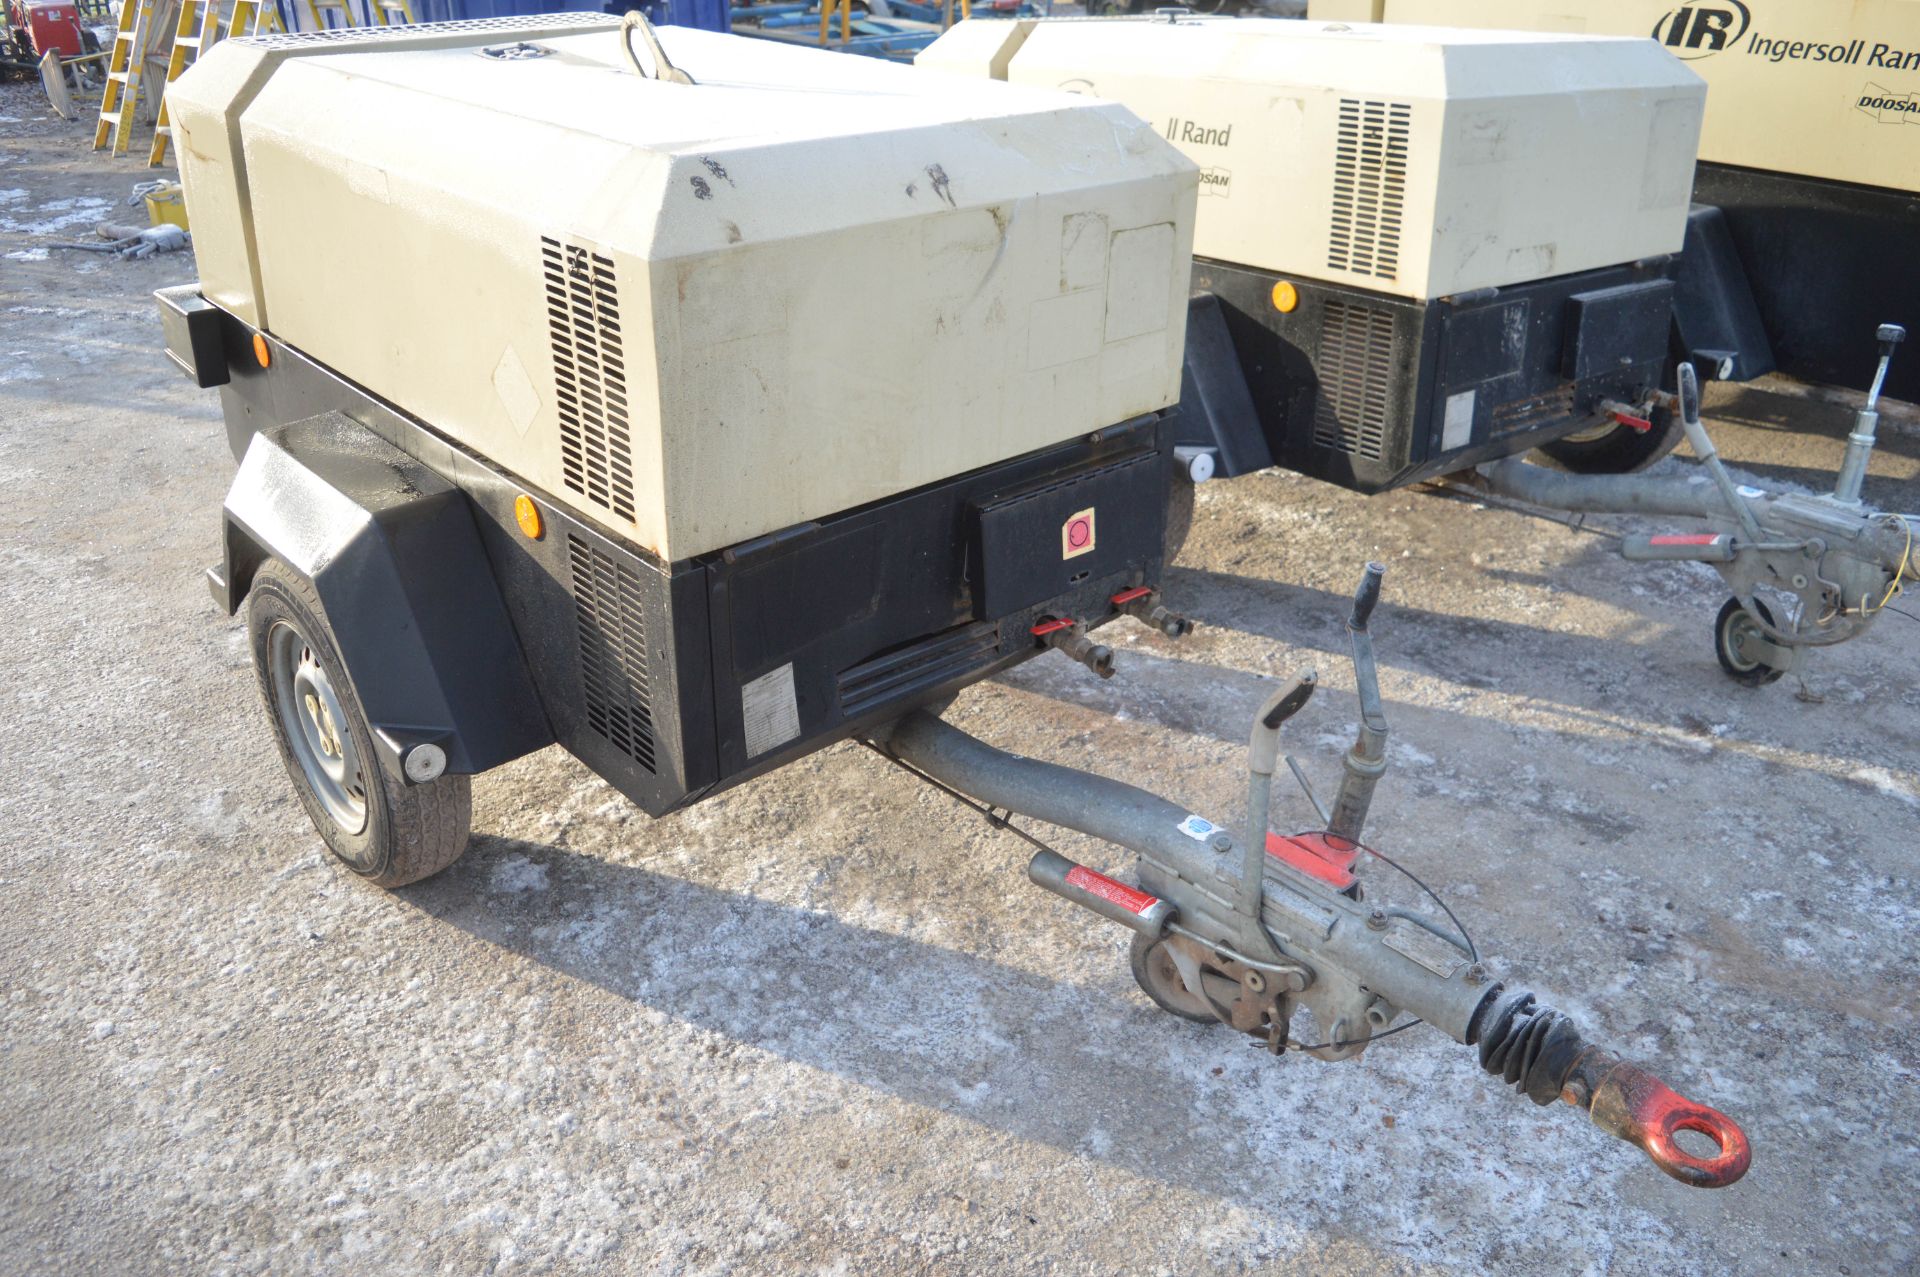 Ingersoll Rand 741 diesel driven mobile air compressor  S/N: BY430743 Year: 2011  Recorded hours: